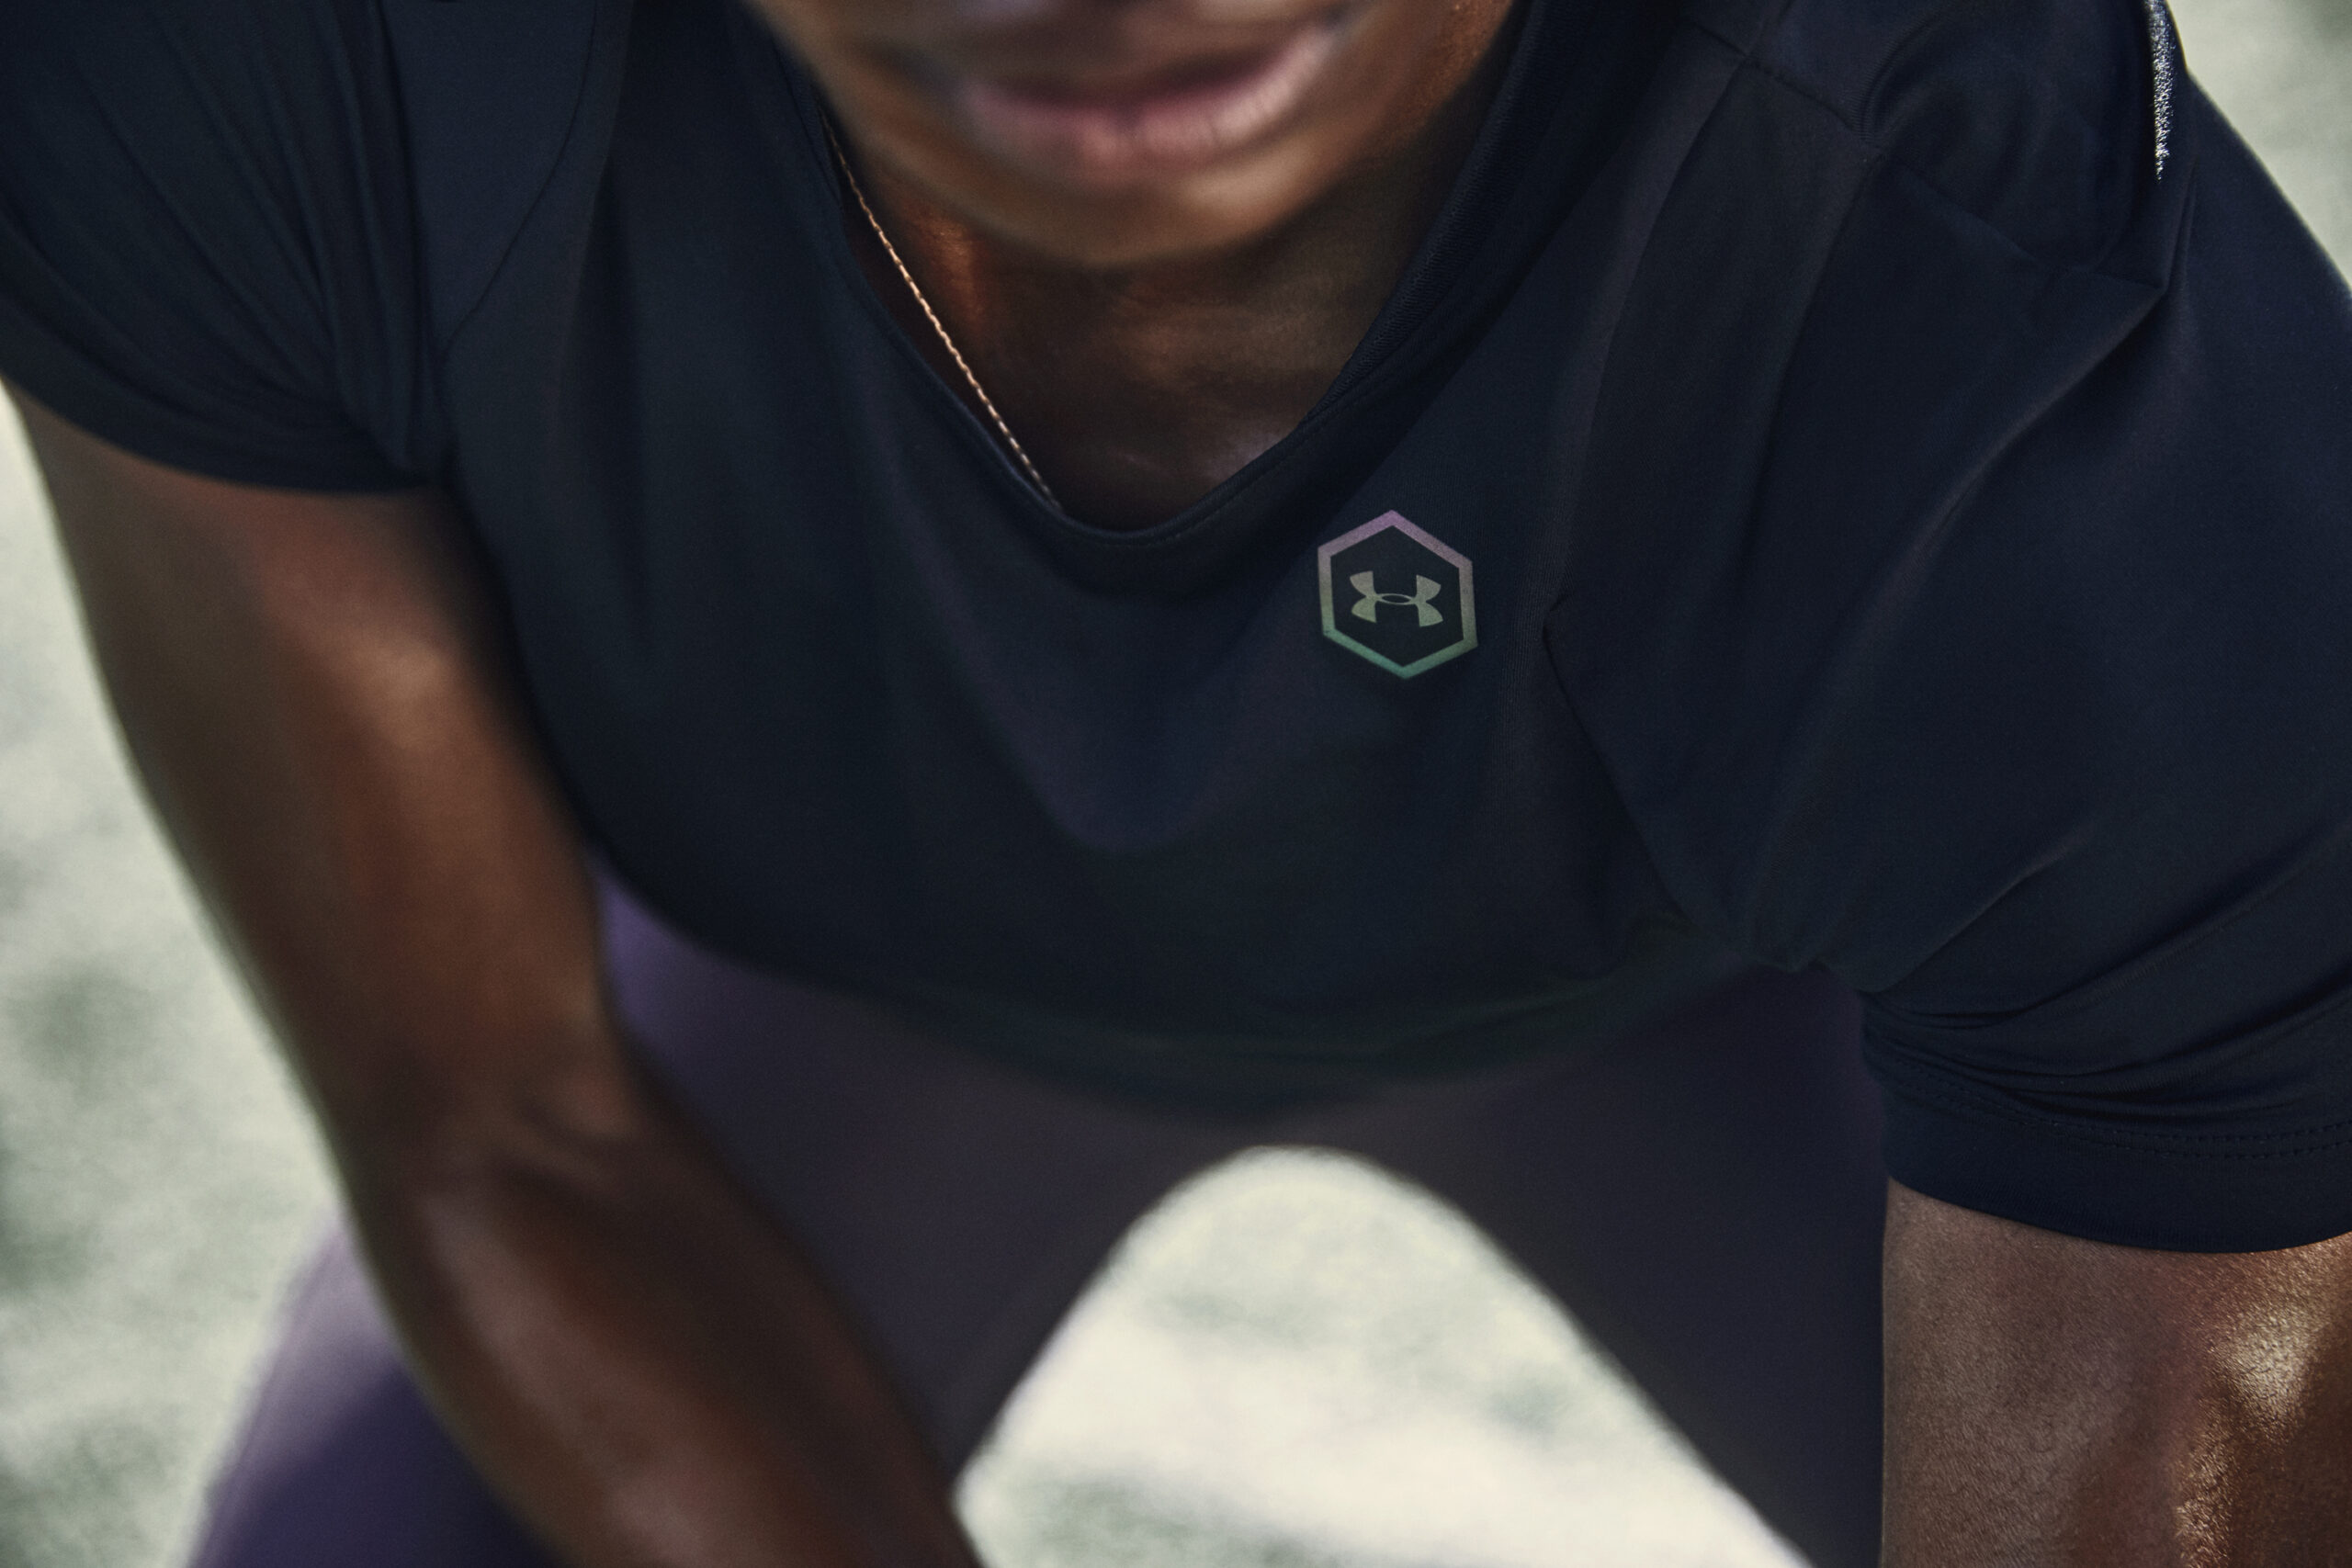 Unlock Your Potential with CELLIANT-Powered Under Armour